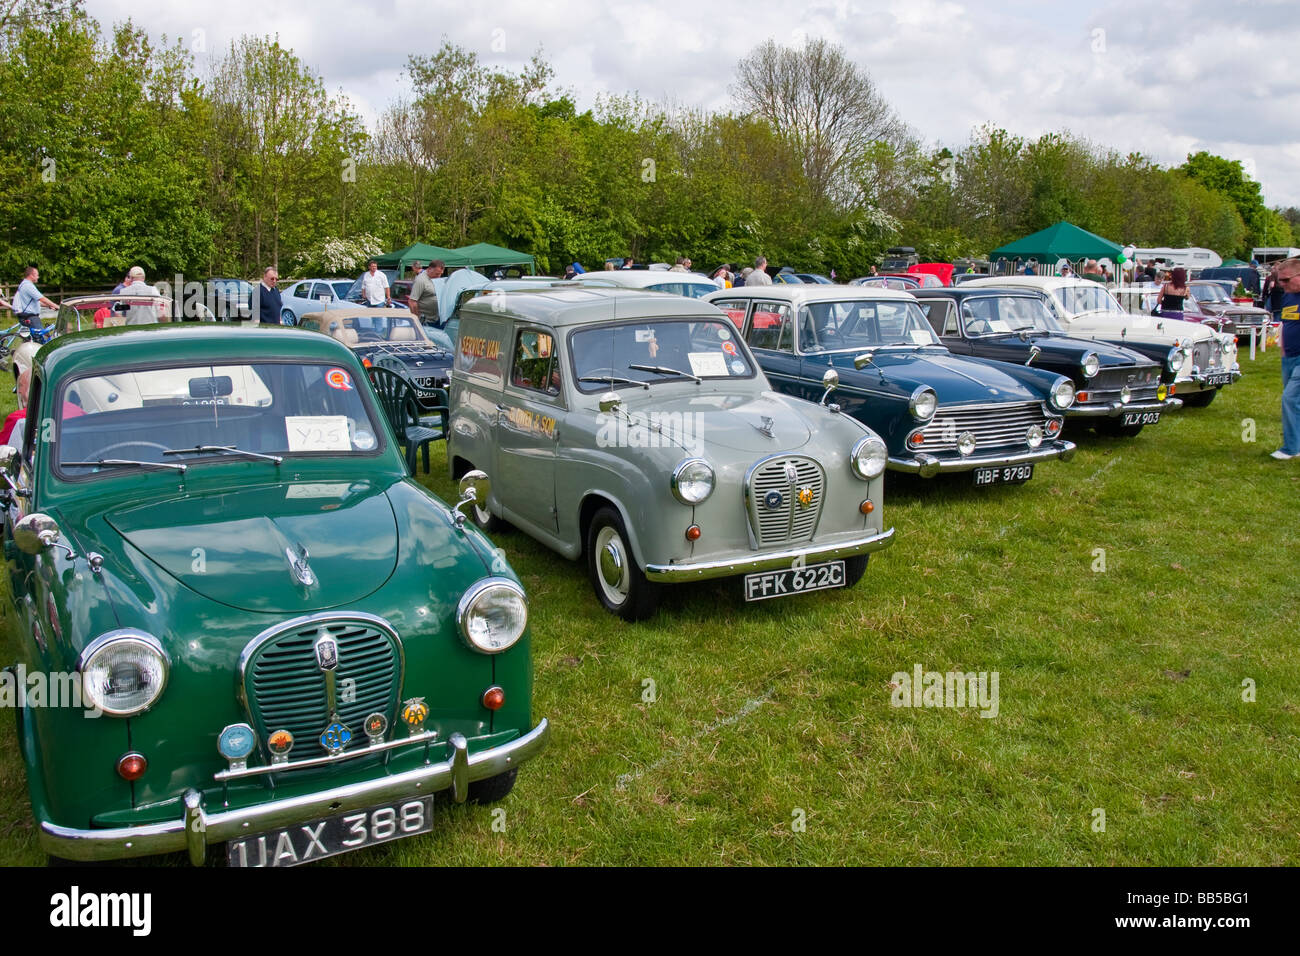 vintage and classic vehicles at a show Stock Photo